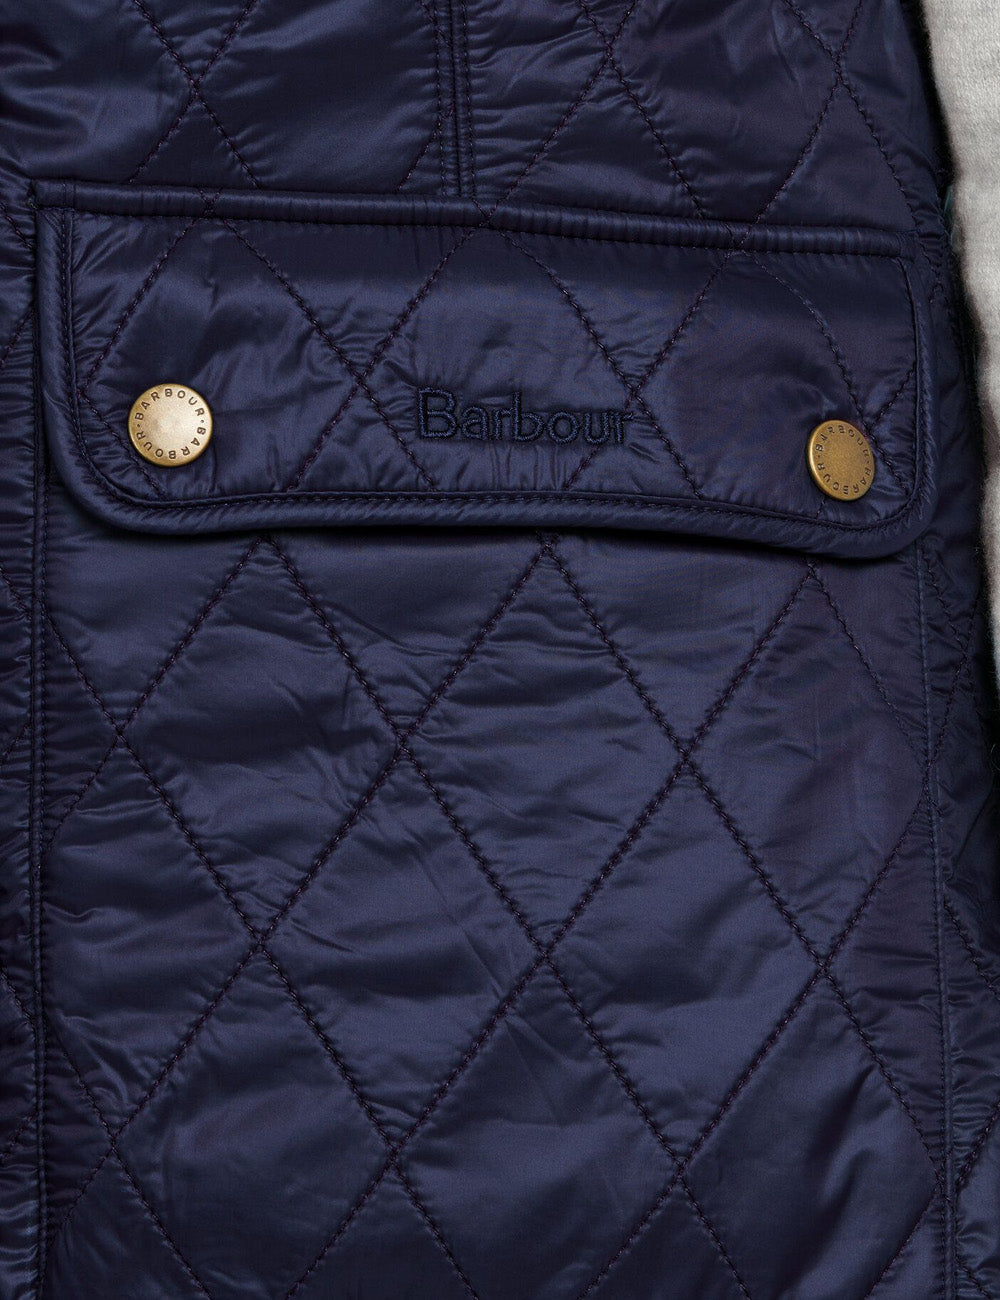 Barbour Wray Gilet - Navy